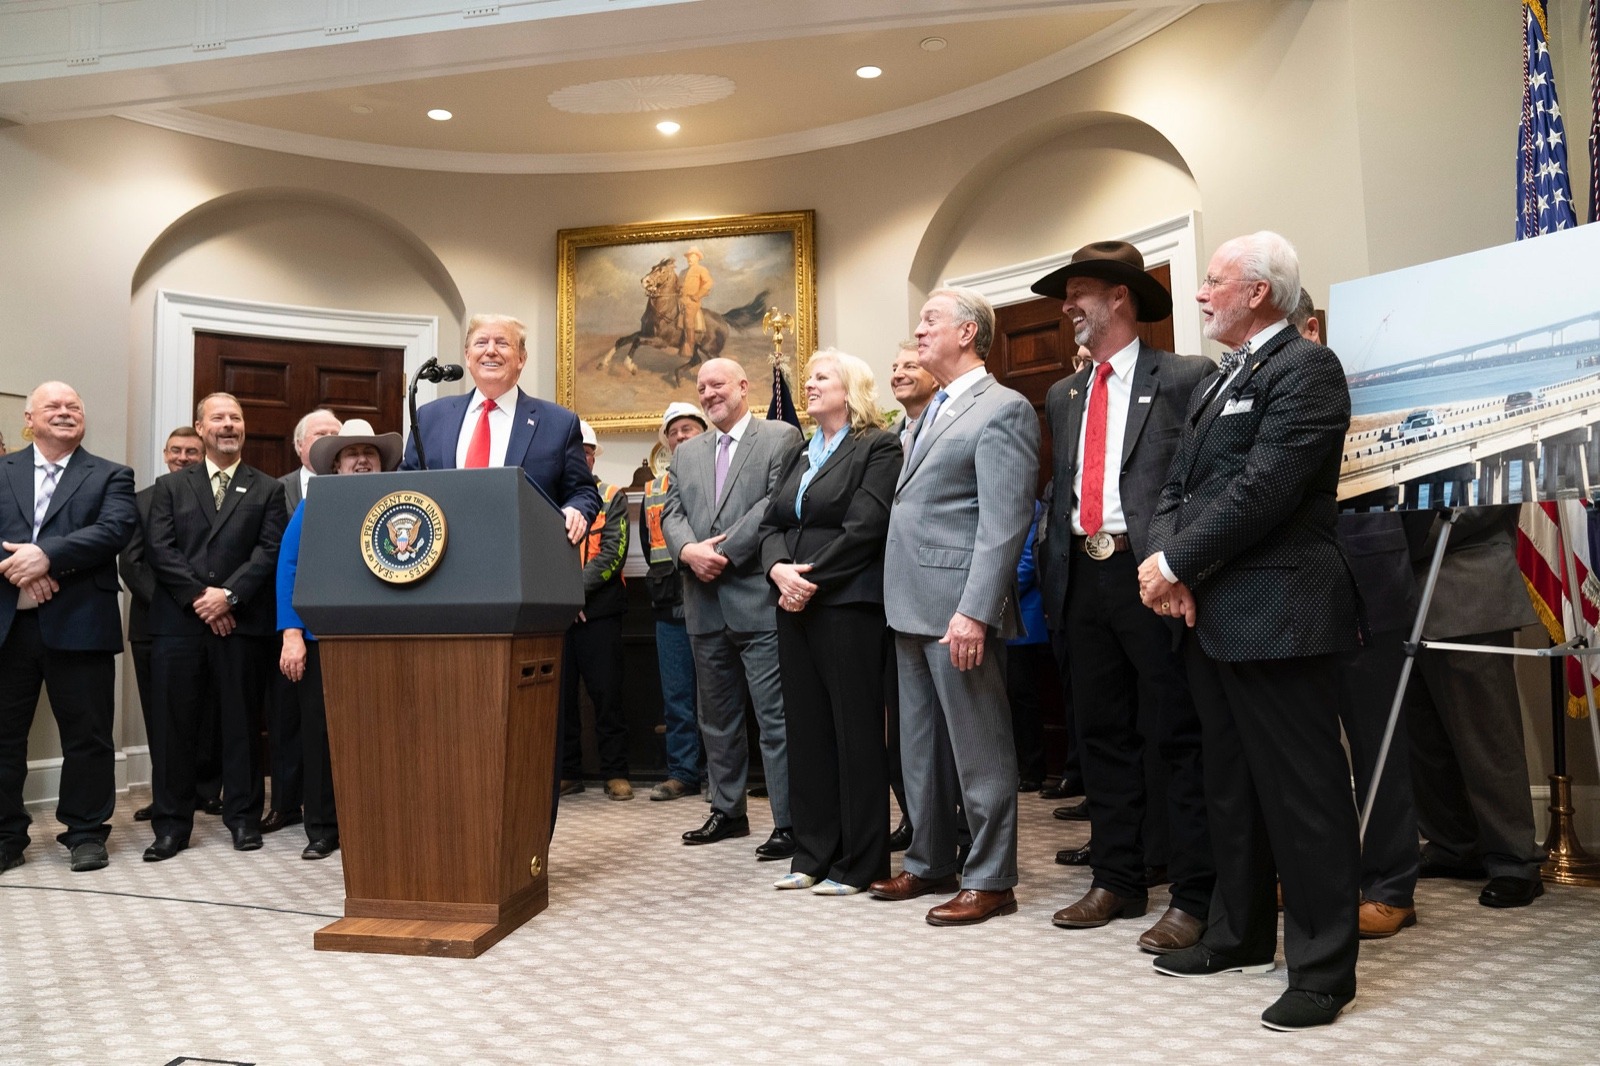 President Trump, flanked by cabinet members and leaders of industry, announced sweeping changes to the National Environmental Policy Act in early January 2020 in the Roosevelt Room of the White House. In the background is a portrait of Theodore Roosevelt, America's first conservationist President.